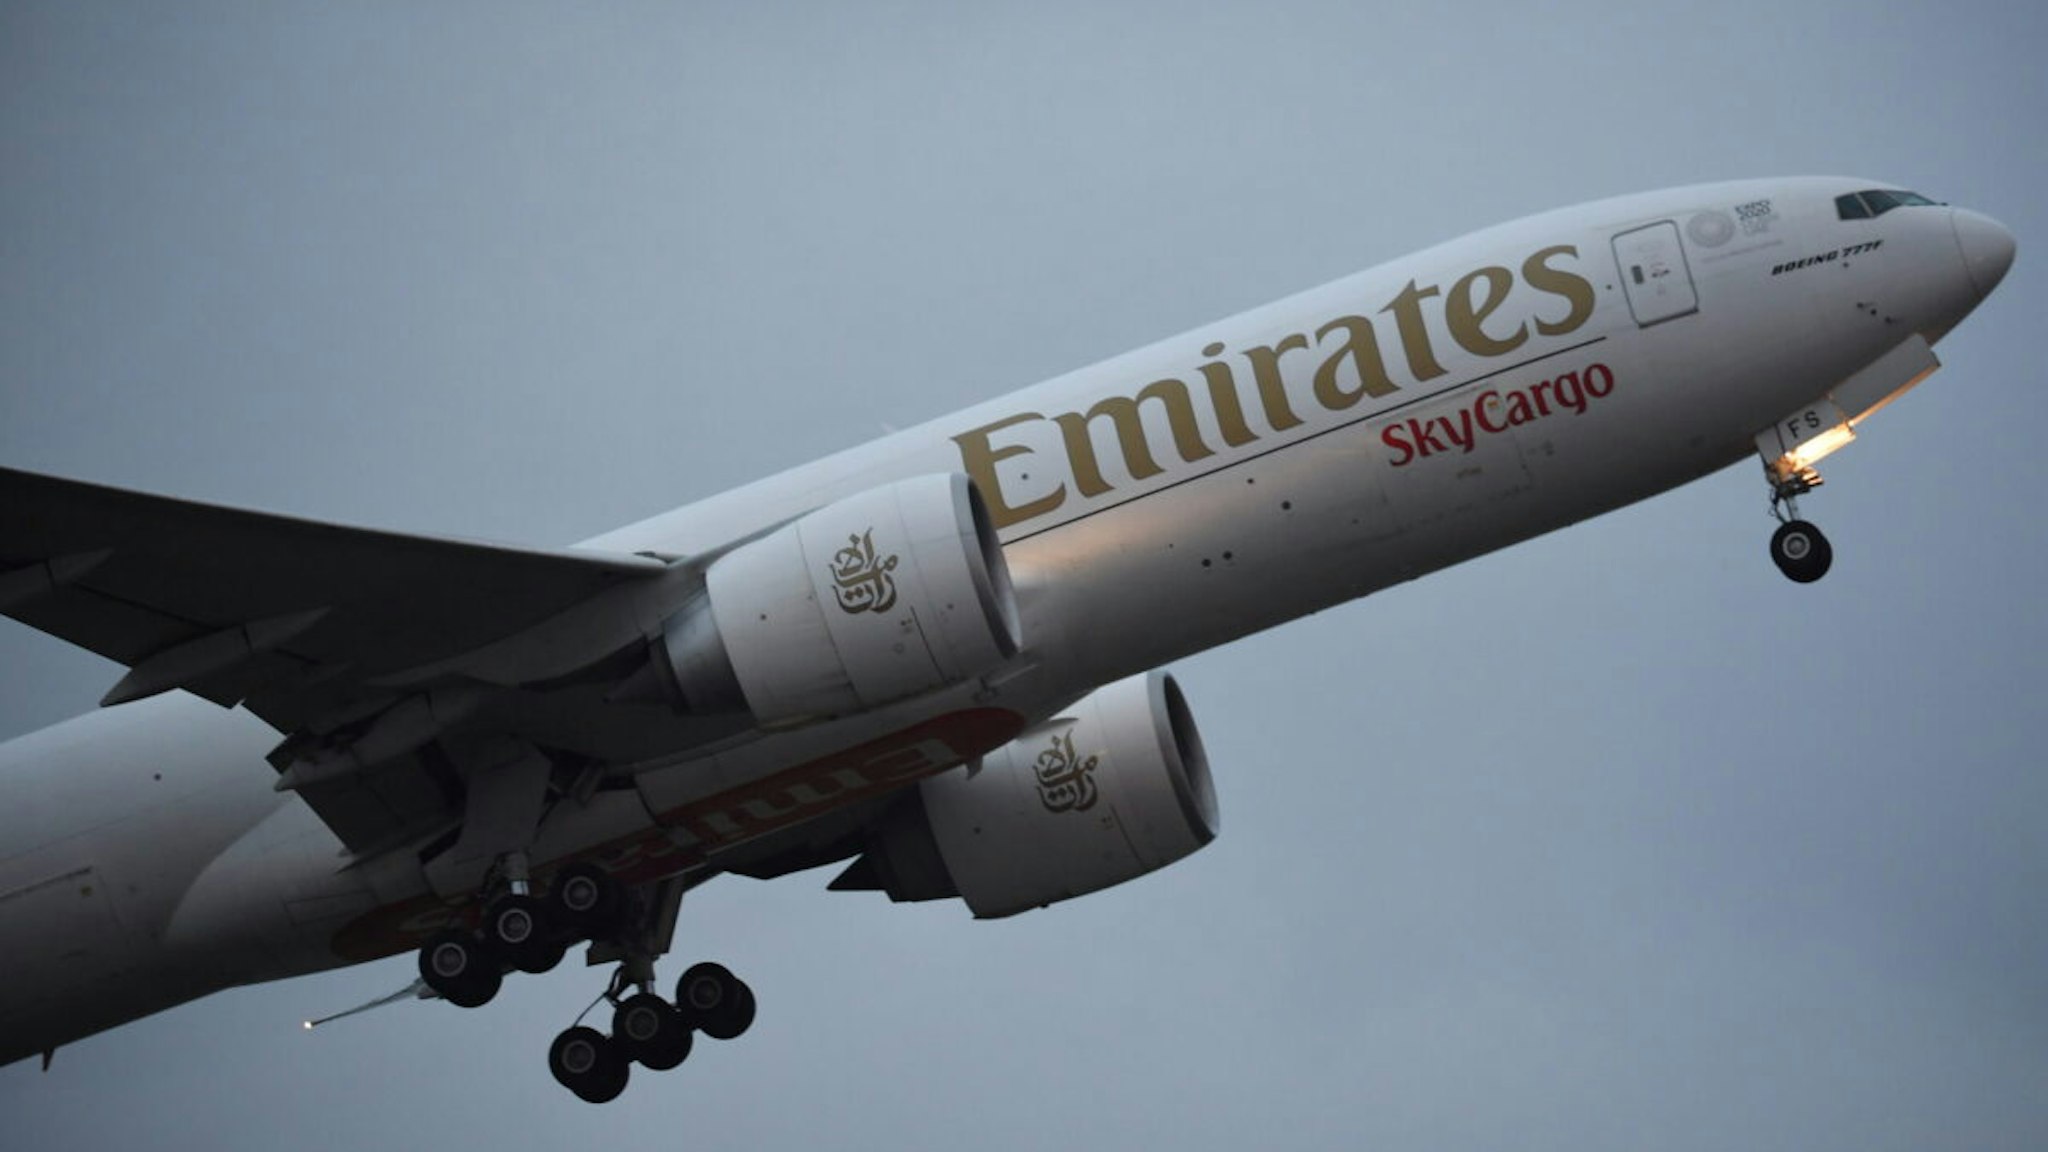 An Emirates Boeing 777 Sky Cargo aircraft takes off at Sydney Kingsford Smith International Airport on September 01, 2021 in Sydney, Australia.